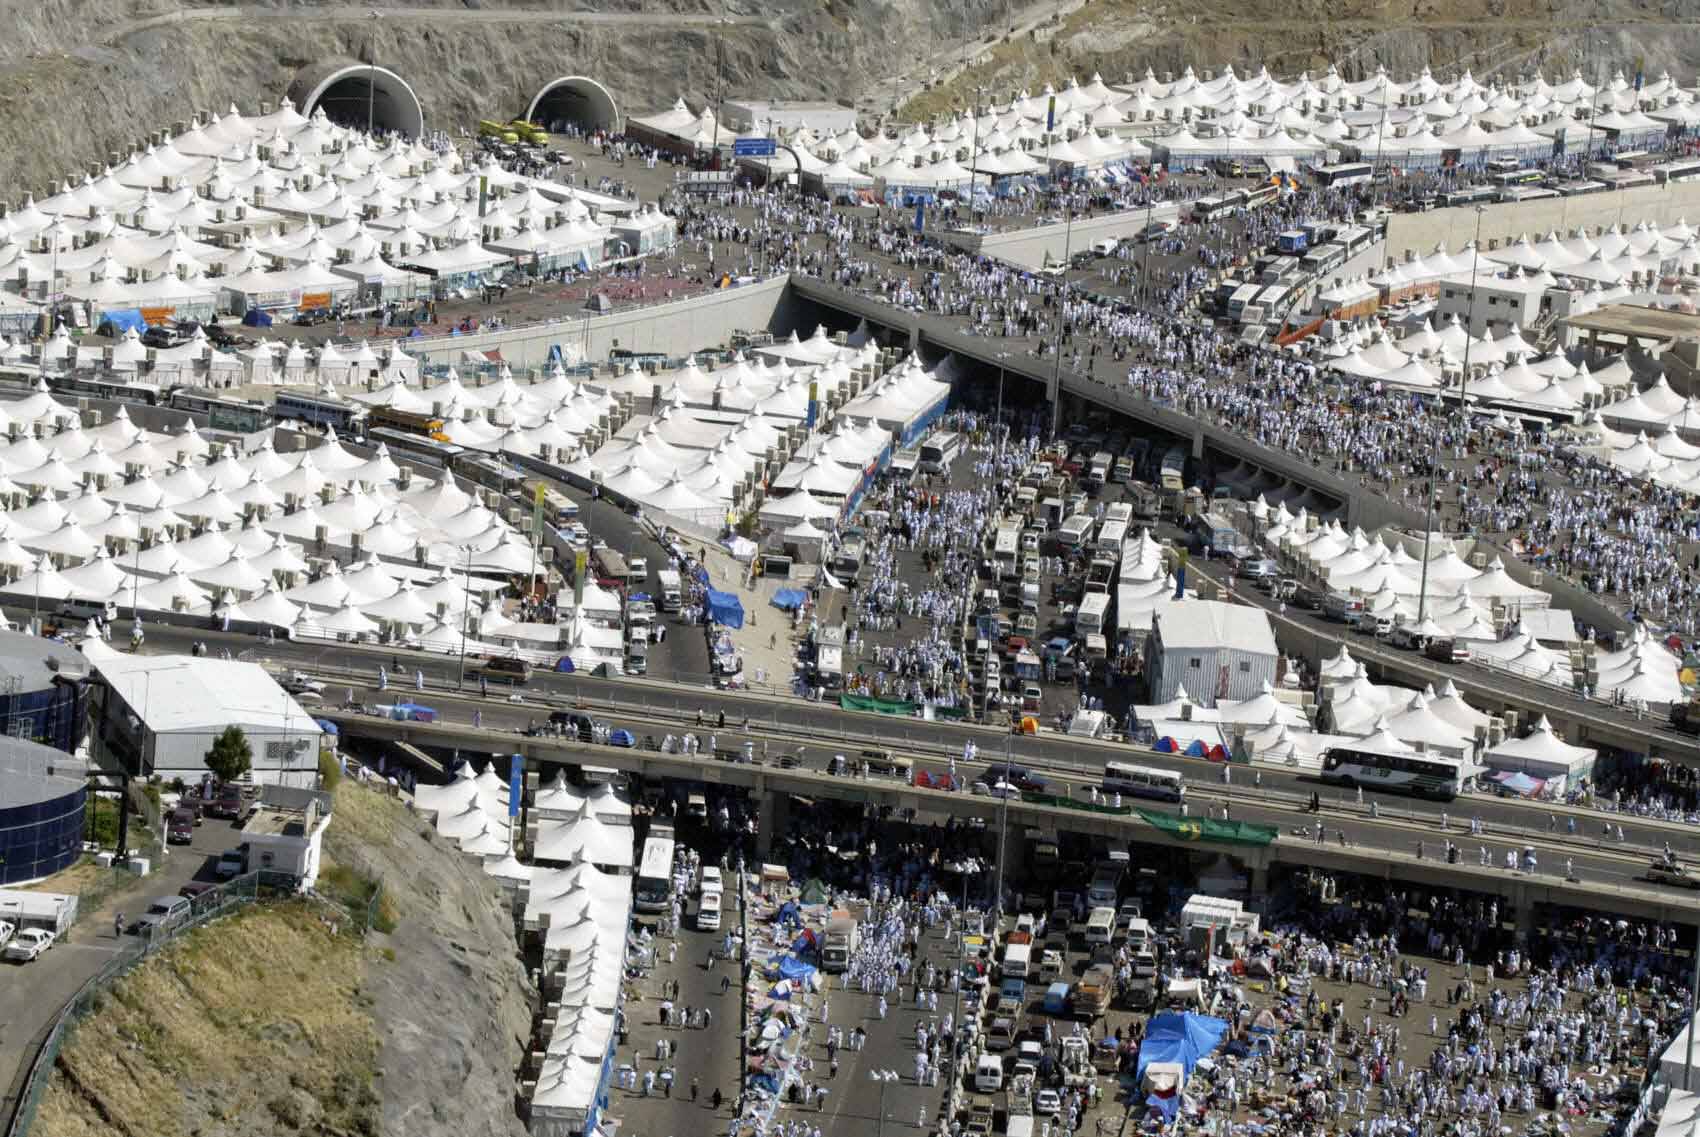 An aerial view of Mina, near Mecca, shows scores of Muslim pilgrmis walking towards the spot where they stone the devil, one of the rituals of the last stage of the annual hajj pilgrimage, on second day of Eid Al-Adha, 02 February 2004. Saudi Arabia's King Fahd has ordered "overall plans" to be drawn up to modernise the holy cities of Mecca and Medina after 251 pilgrims died in a stampede, according to the official Saudi media. AFP PHOTO/Awad AWAD